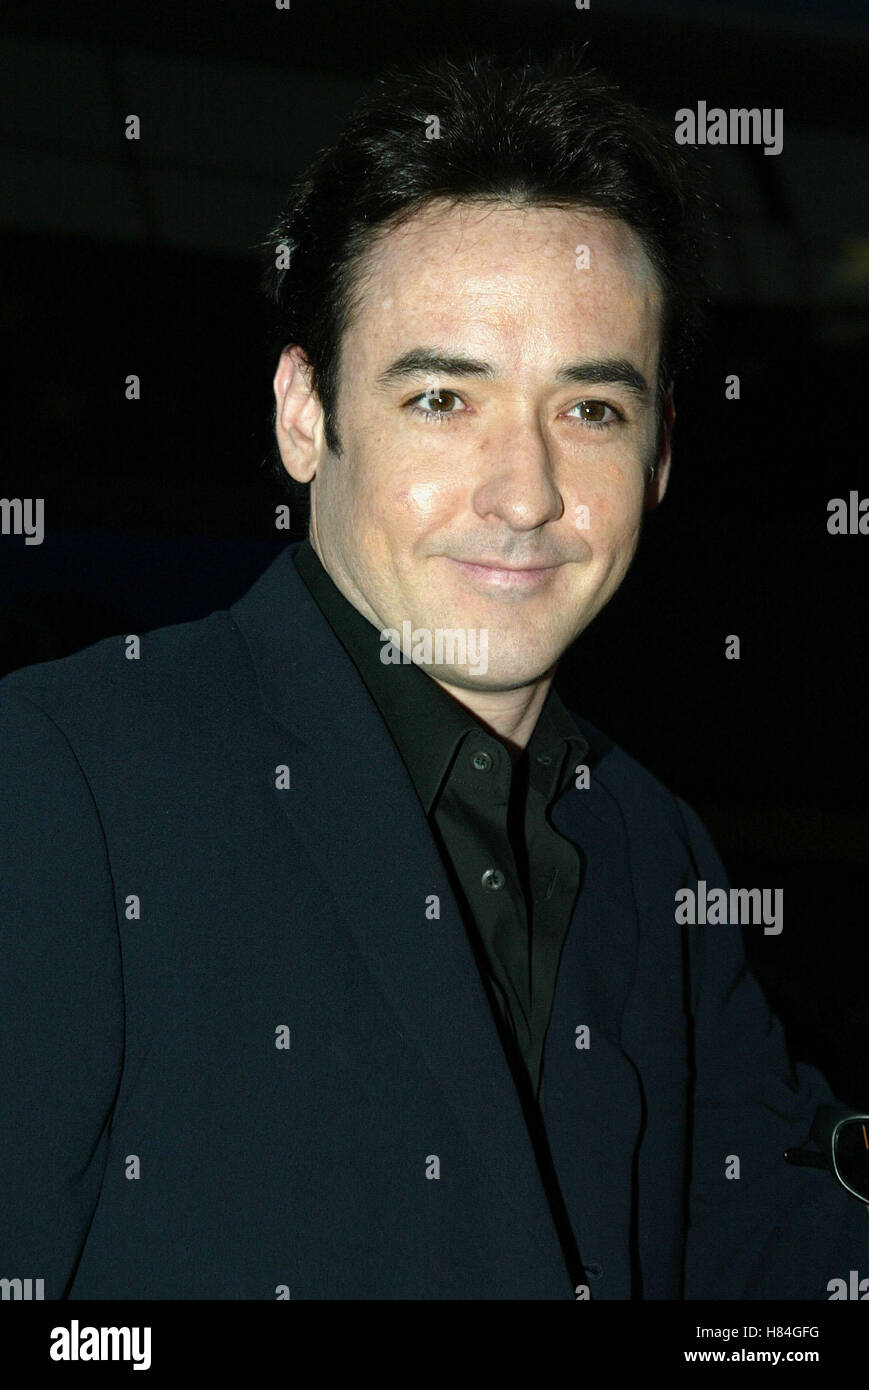 JOHN CUSACK LAST CALL FILM PREMIERE BEVERLY HILLS LOS ANGELES USA 22 May 2002 Stock Photo